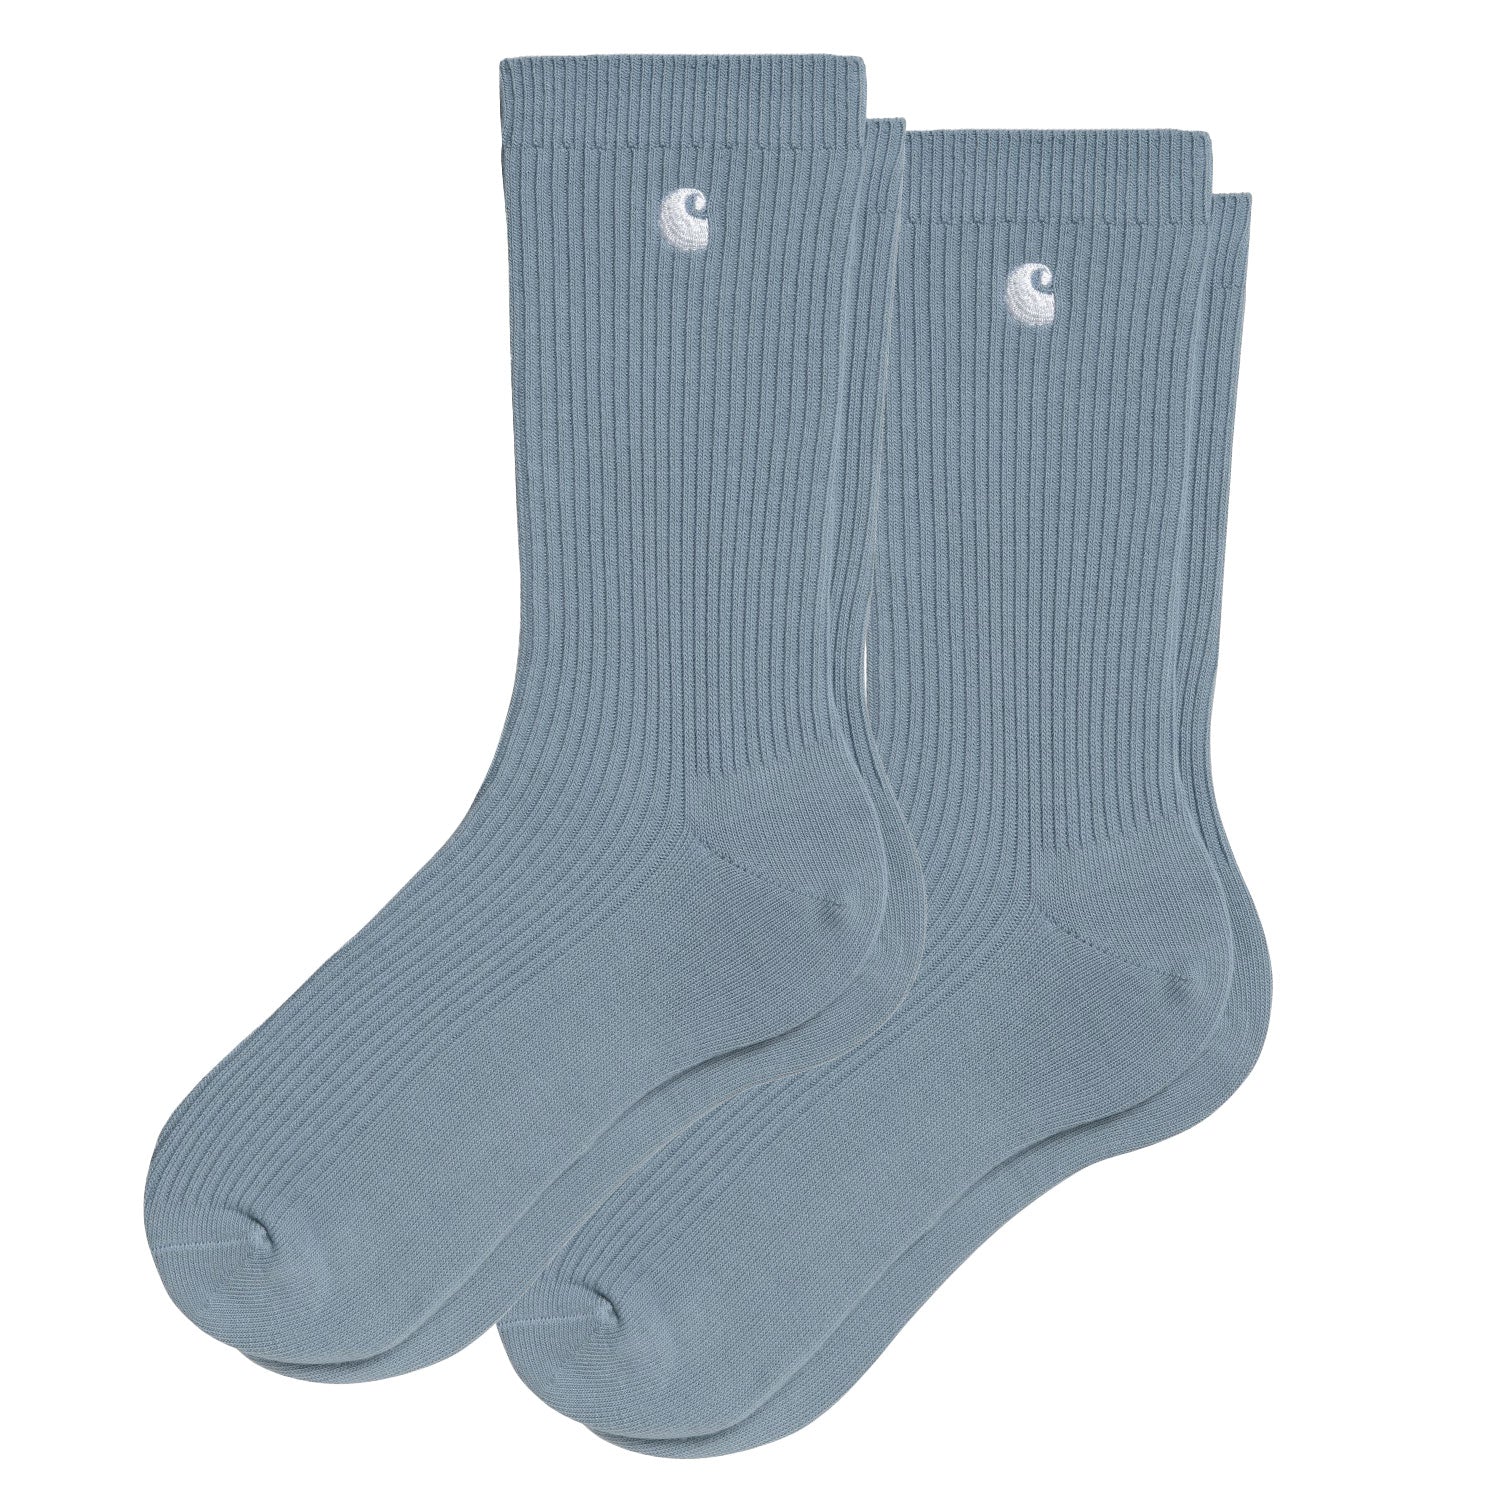 MADISON PACK SOCKS - Frosted Blue / White + Frosted Blue / White